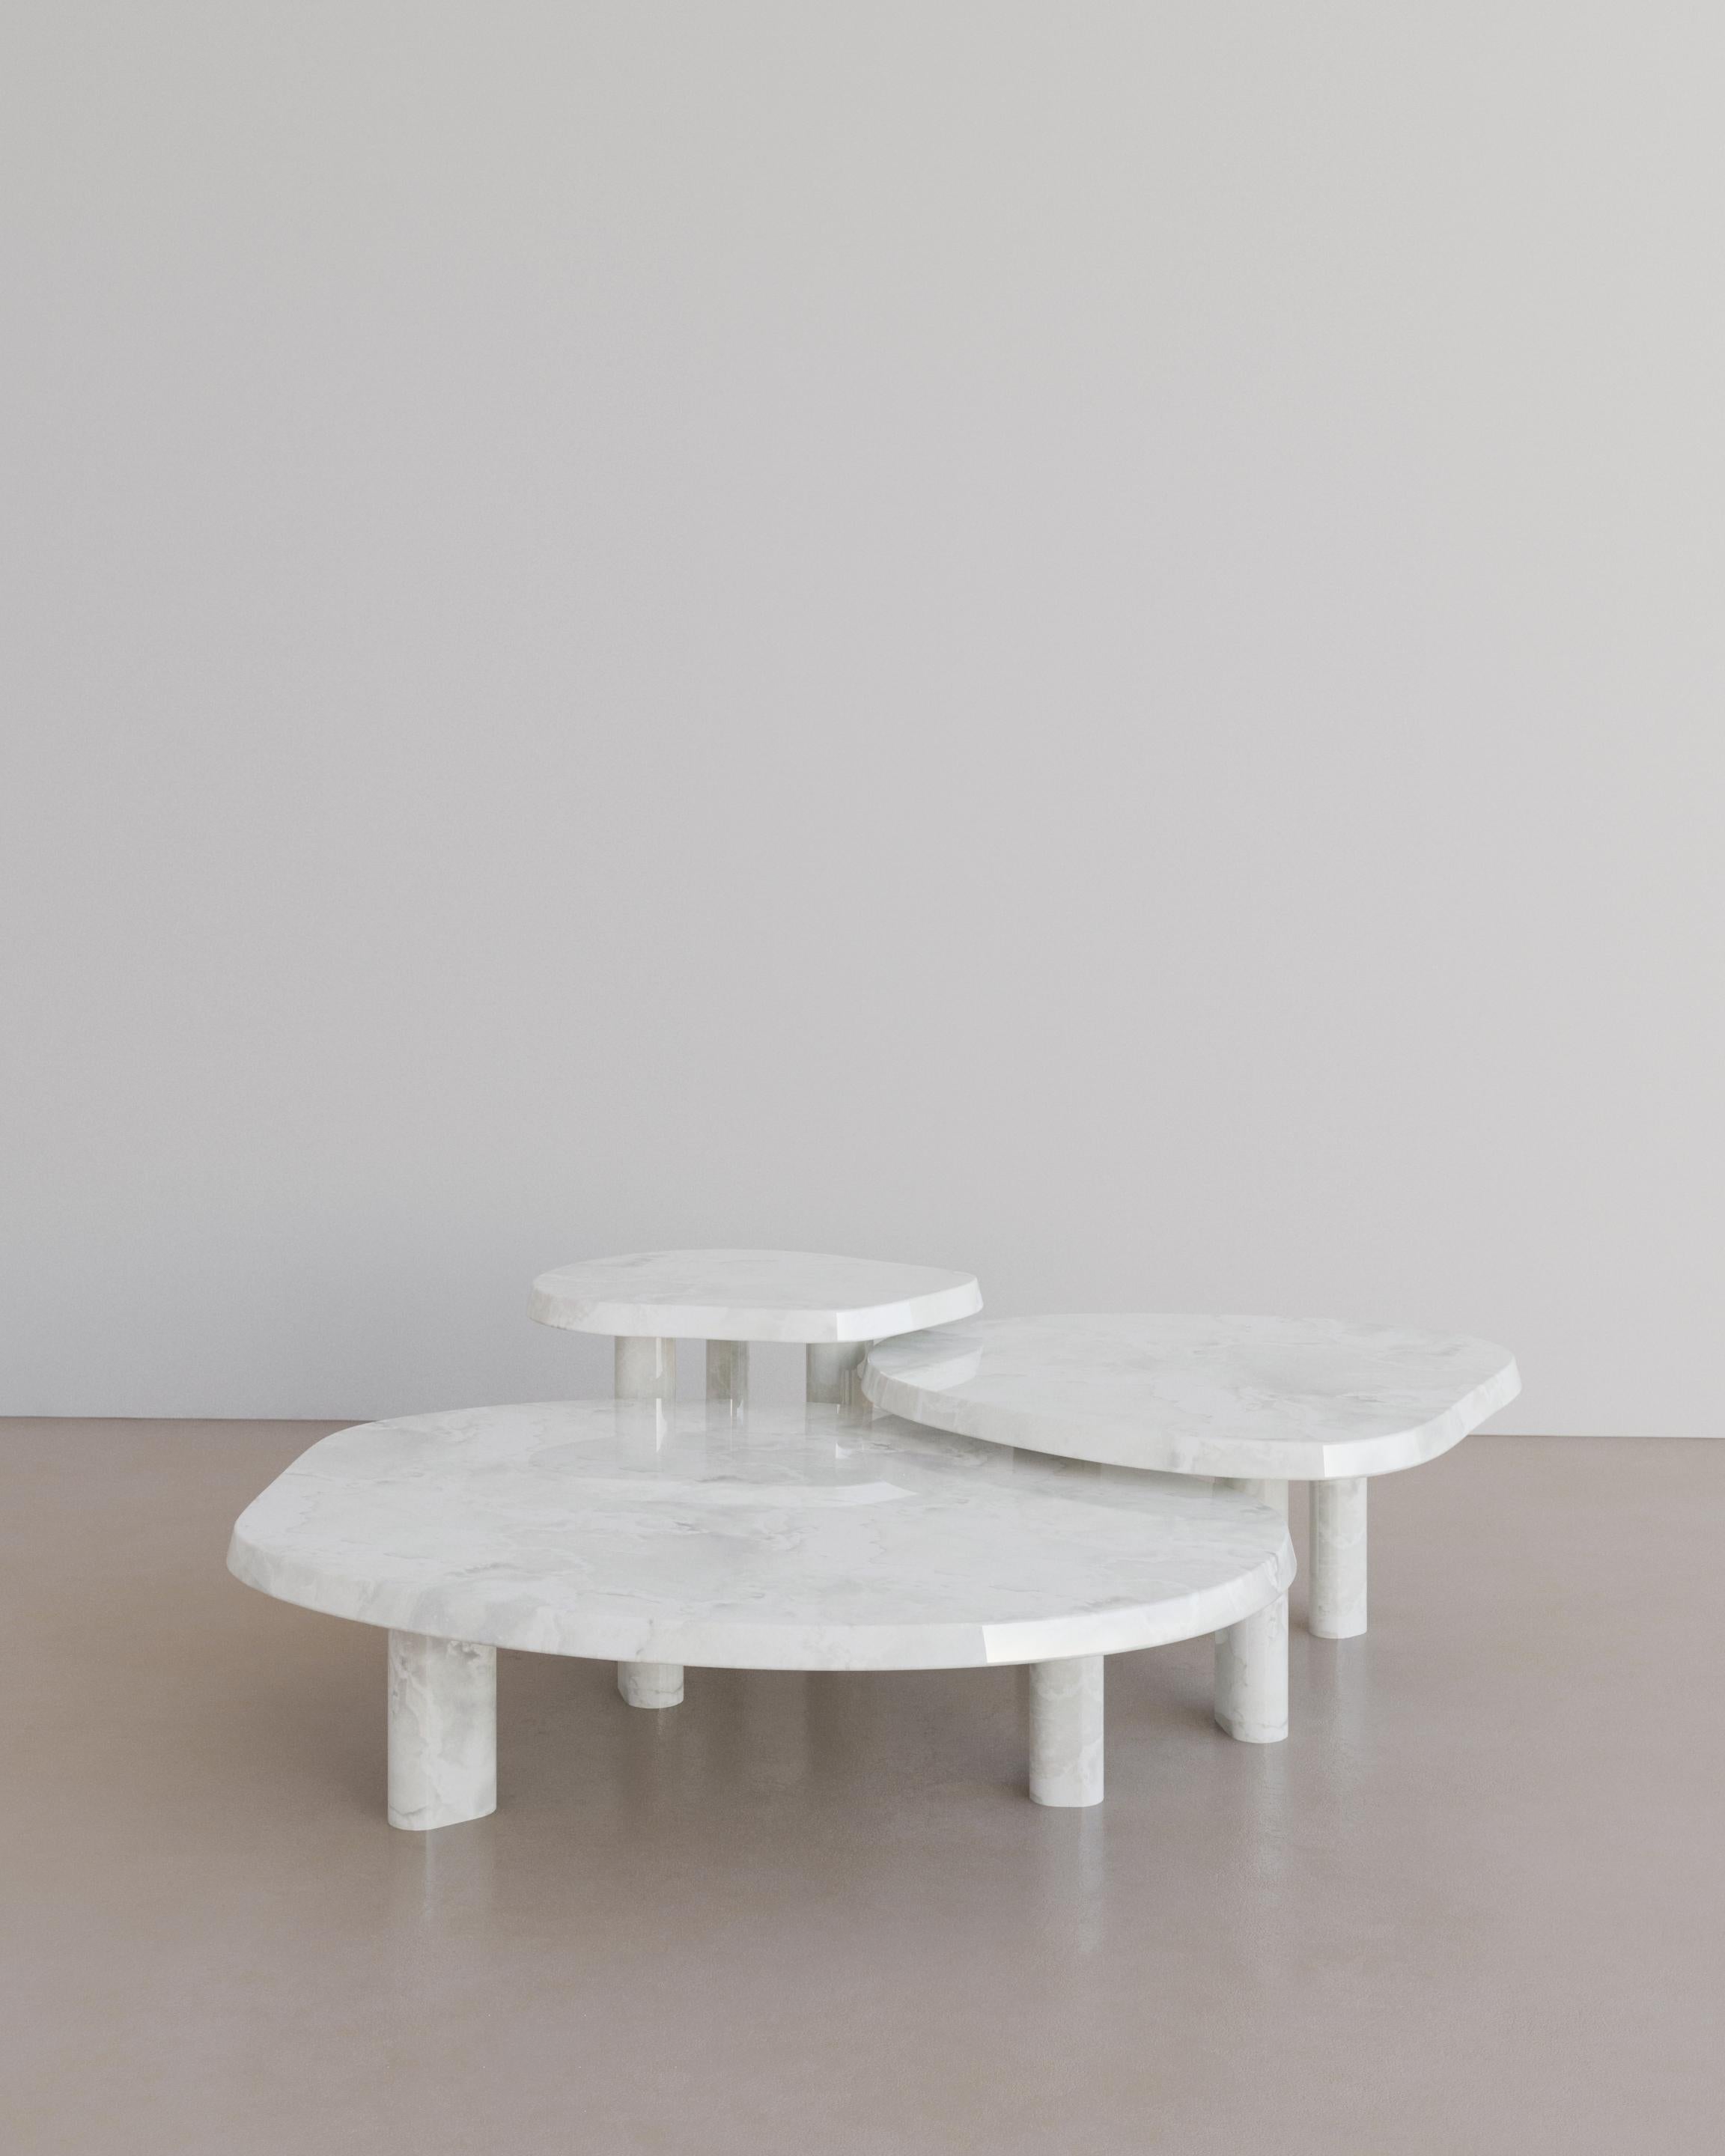 The Fiori Coffee Table in Bianco Onyx by The Essentialist infers a delicate sense of organicism, a vision of sublime is born, revolutionising beauty and deifying stone in its truest expression. Fiori forges a perpetual statement of intuitive